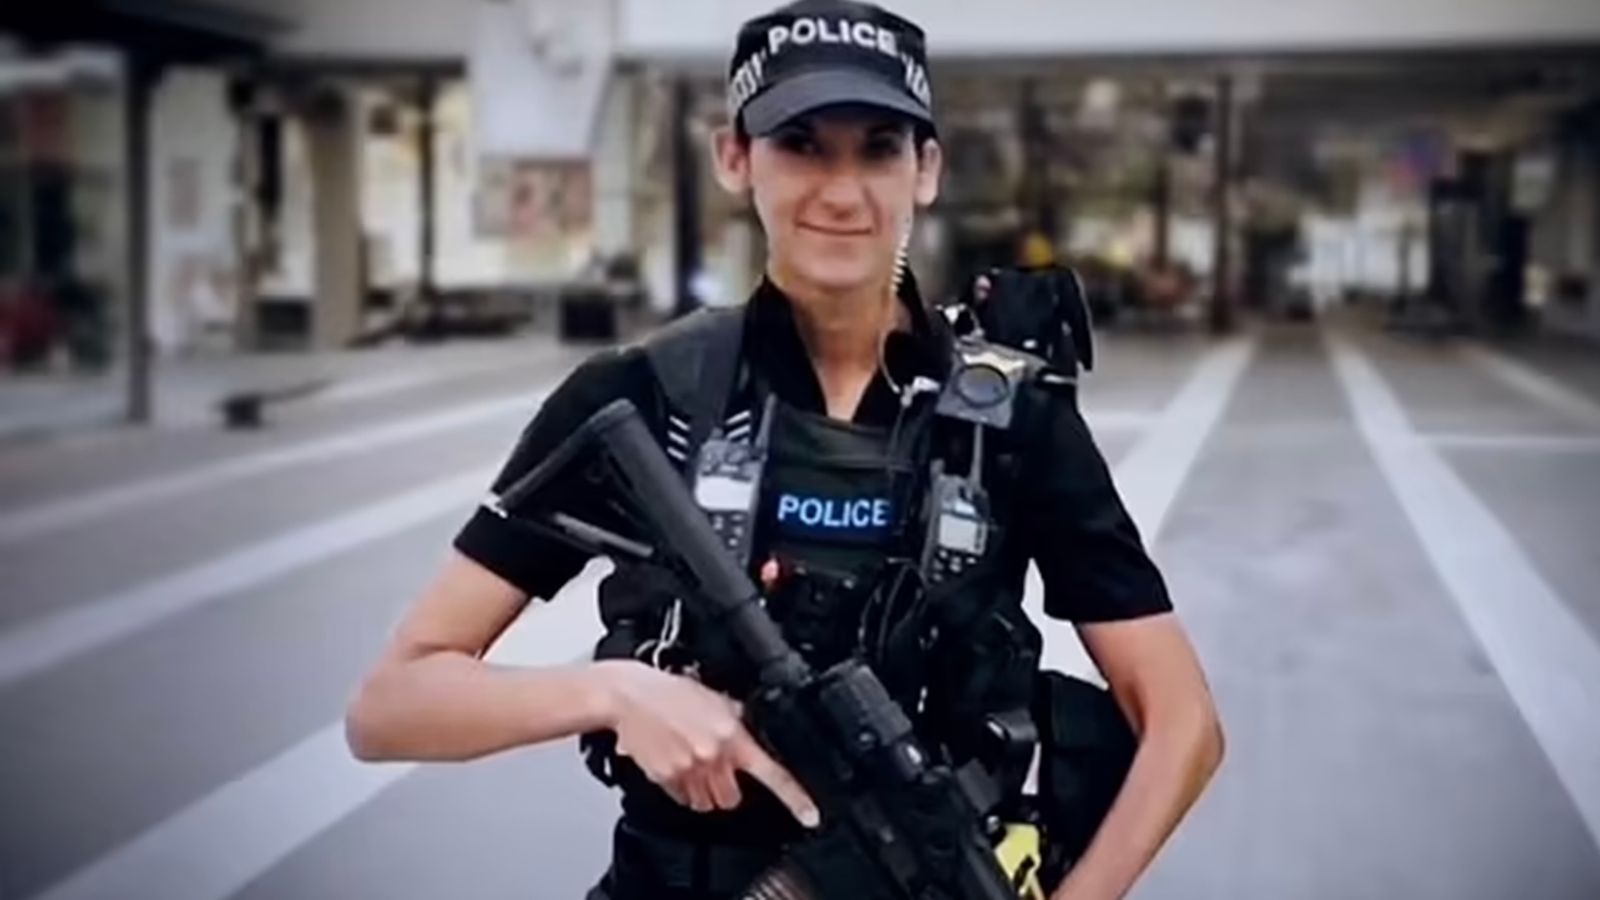 West Midlands Police to pay ex-firearms officer Rebecca Kalam reported sum of £820,000 in sex discrimination case